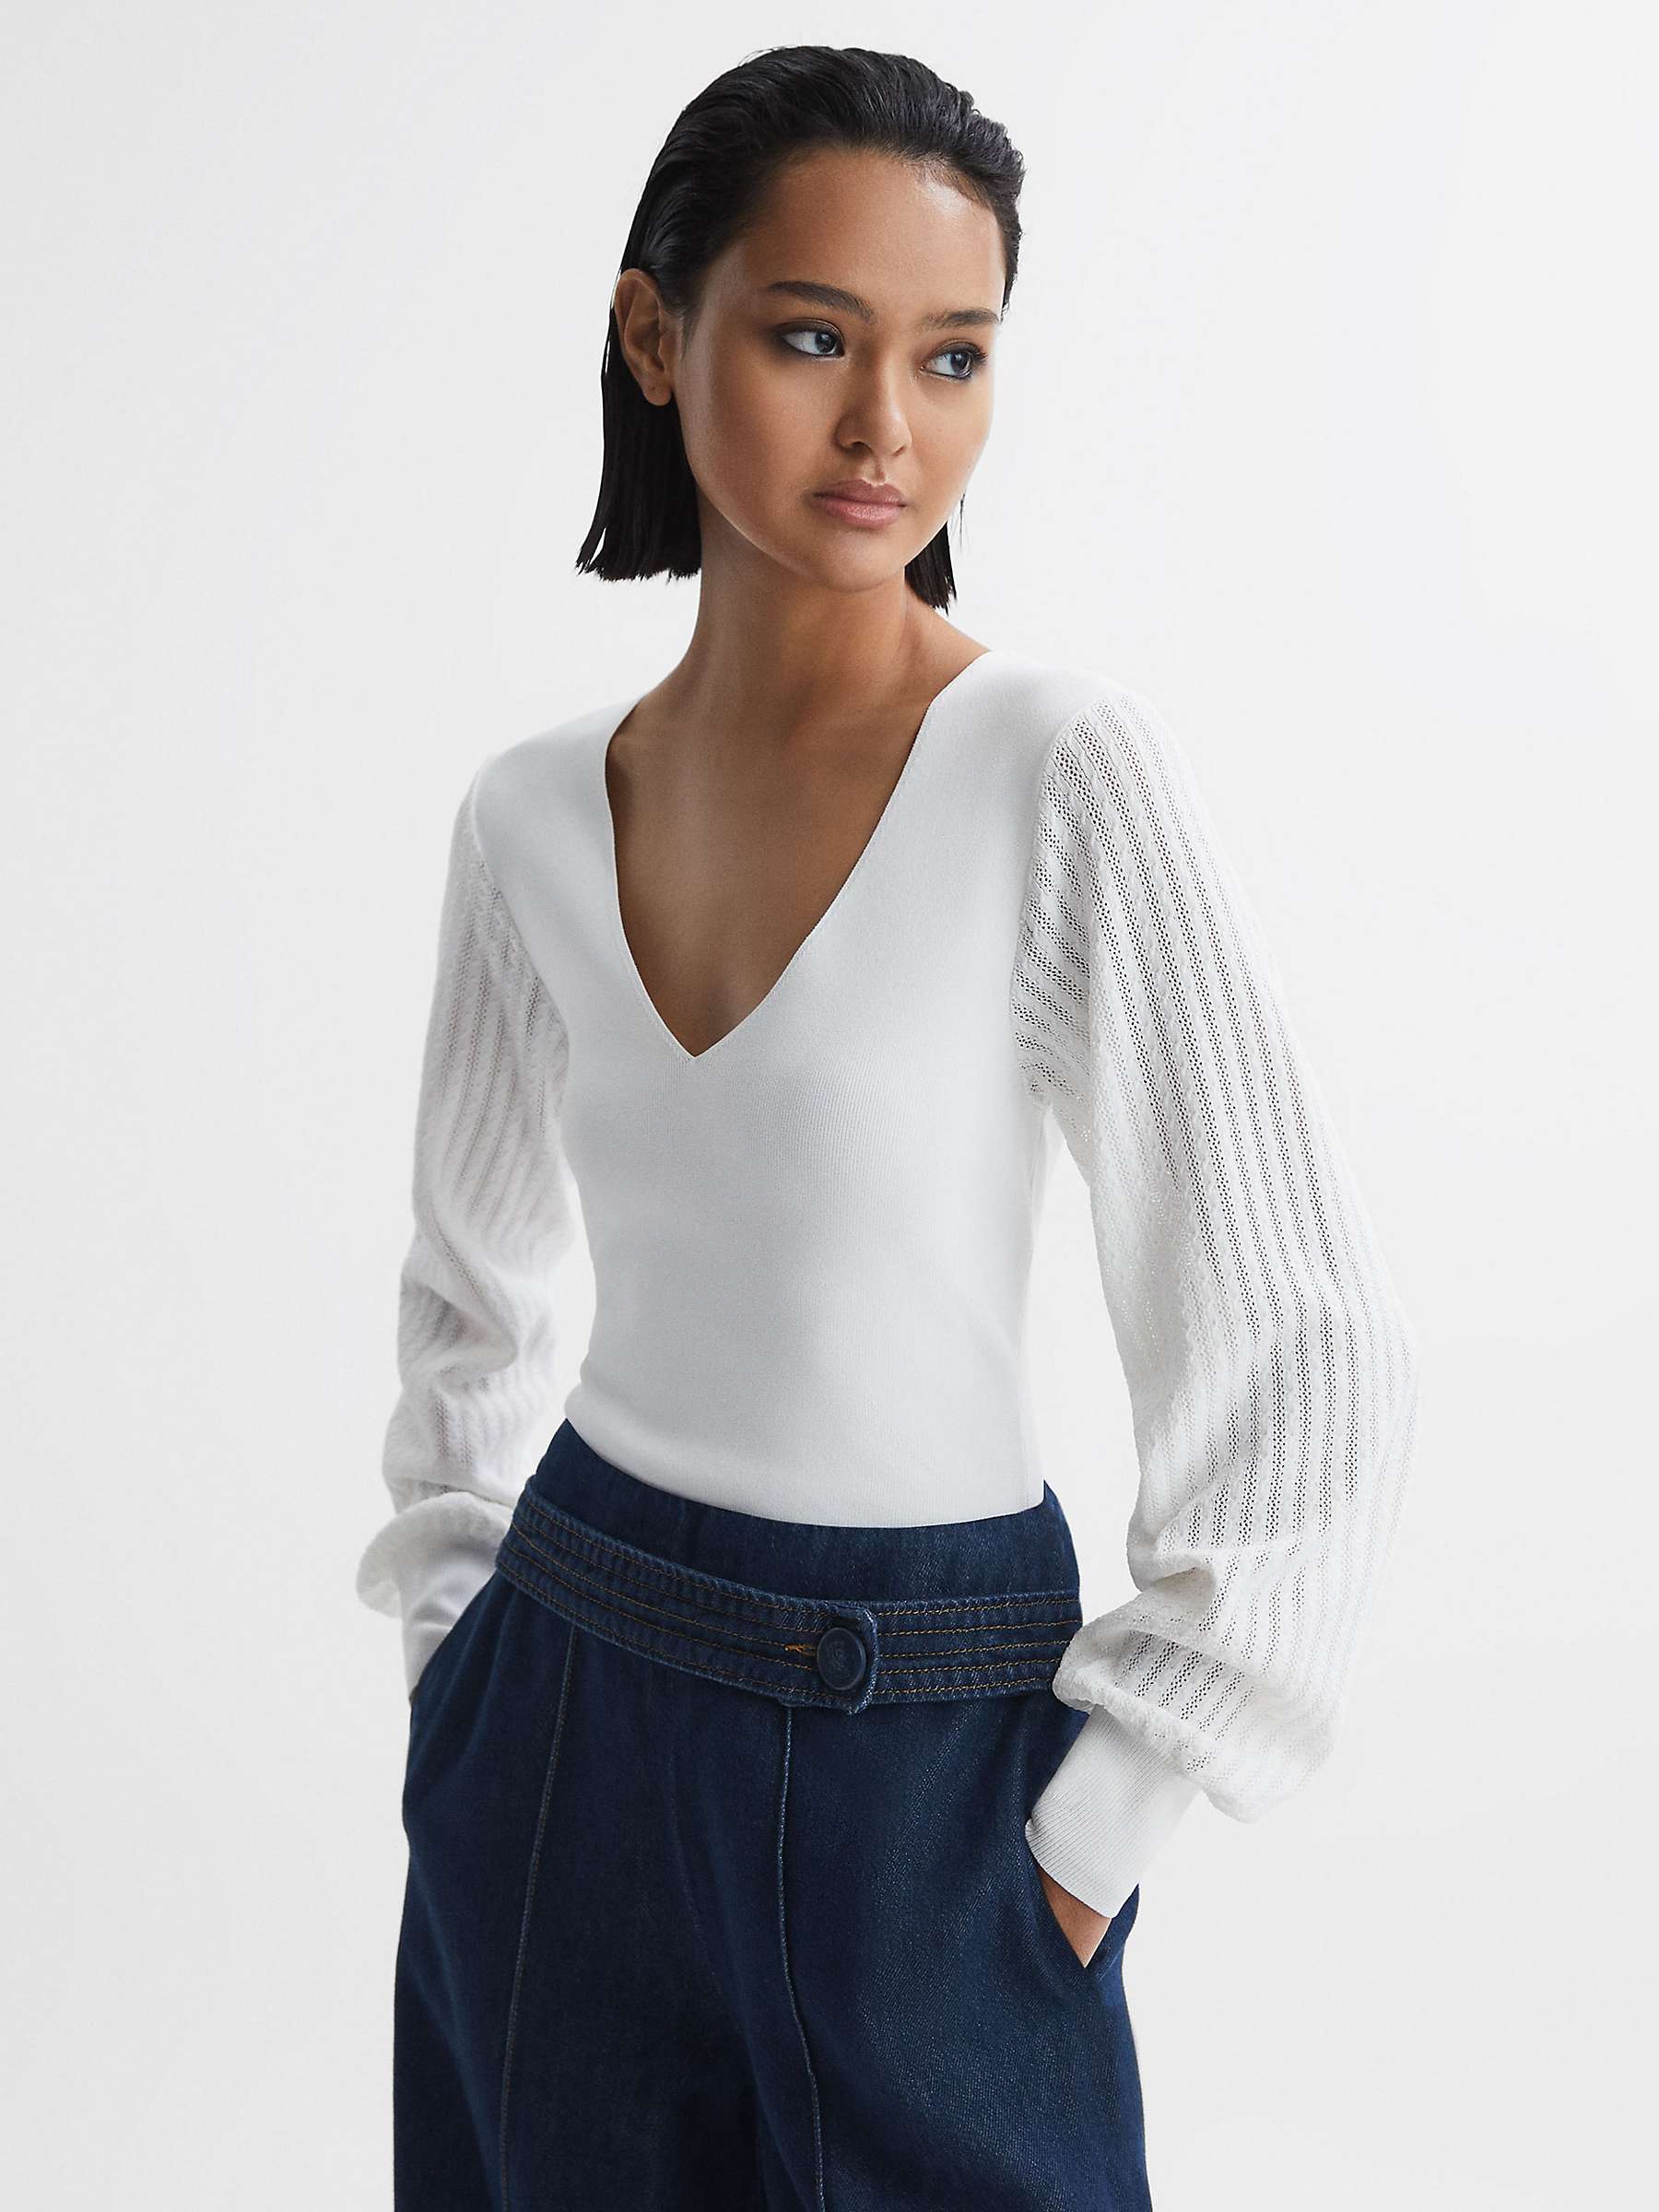 Reiss Lexi Stitch Sleeve Knitted Top, Ivory at John Lewis & Partners